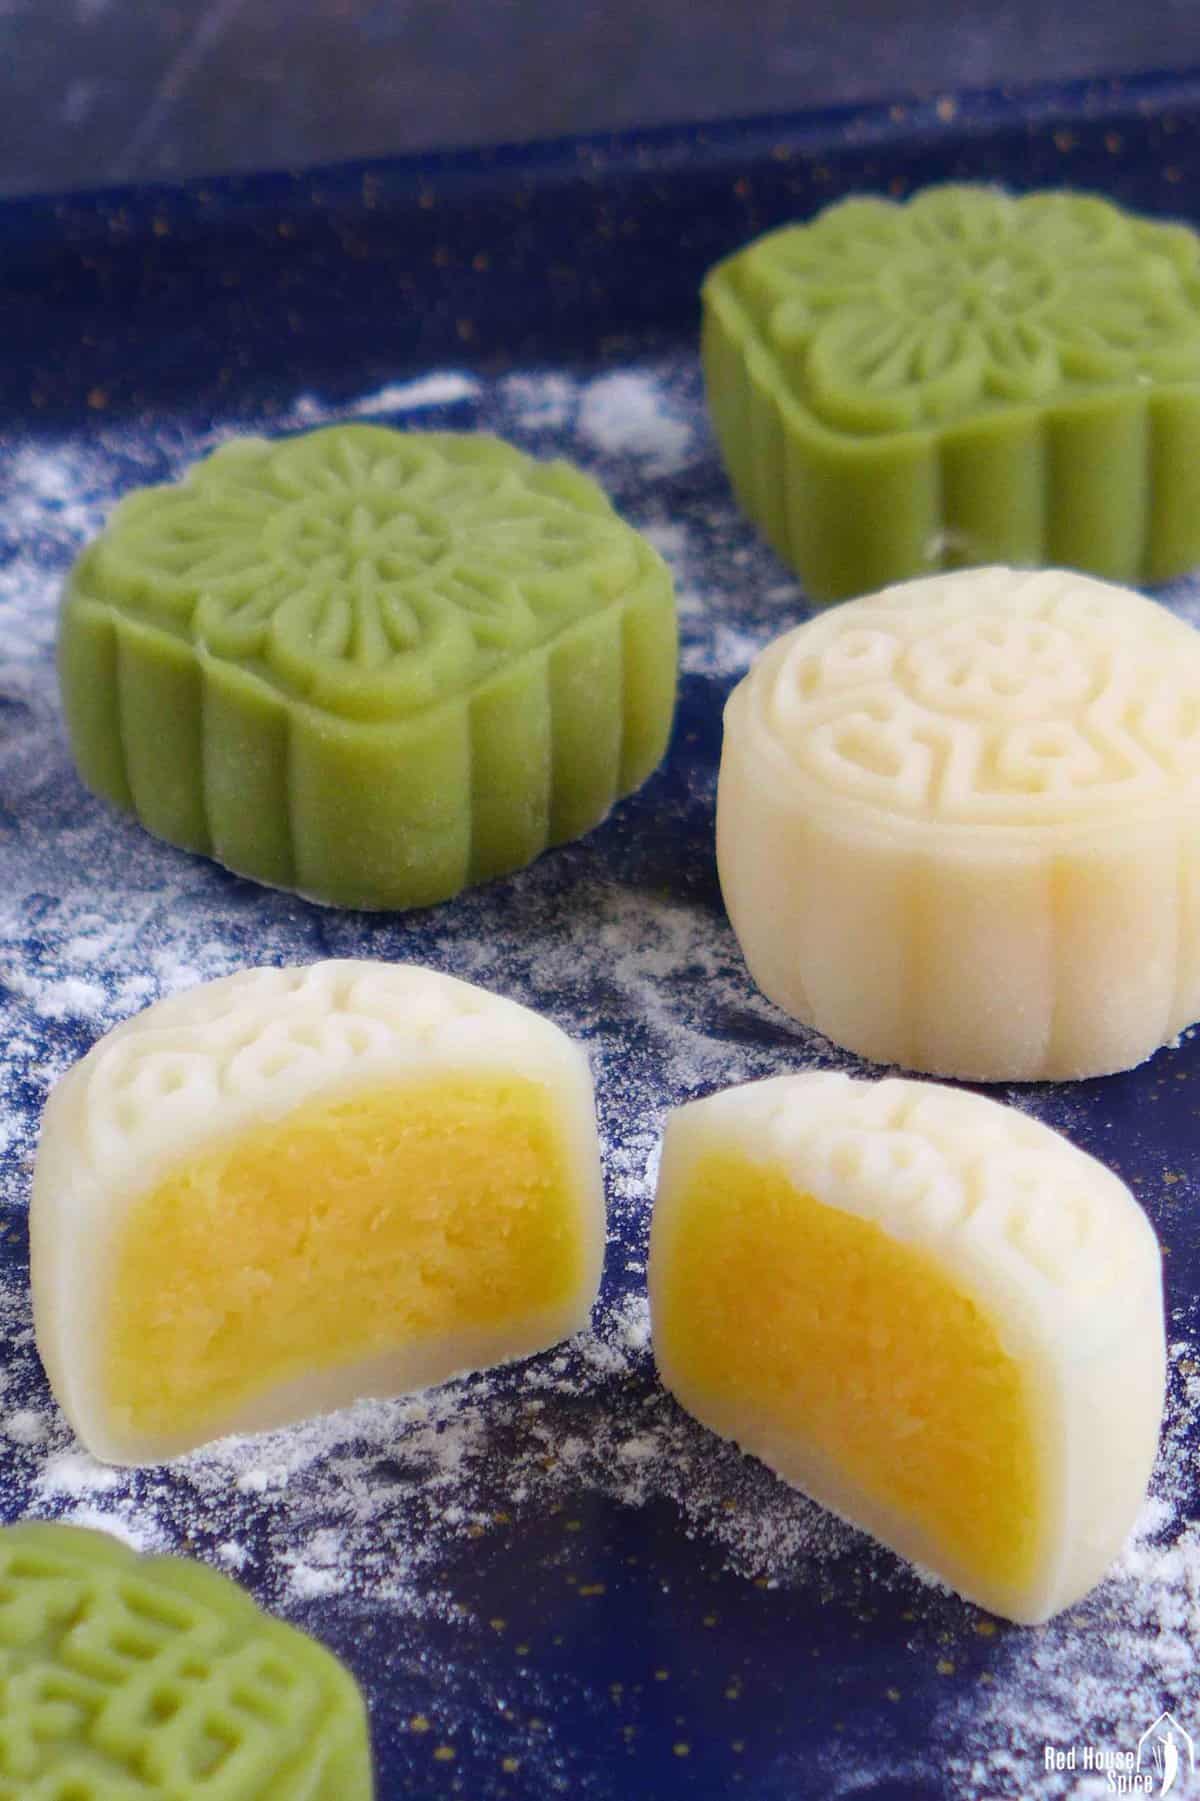 Snow skin mooncakes with one cut in halves.